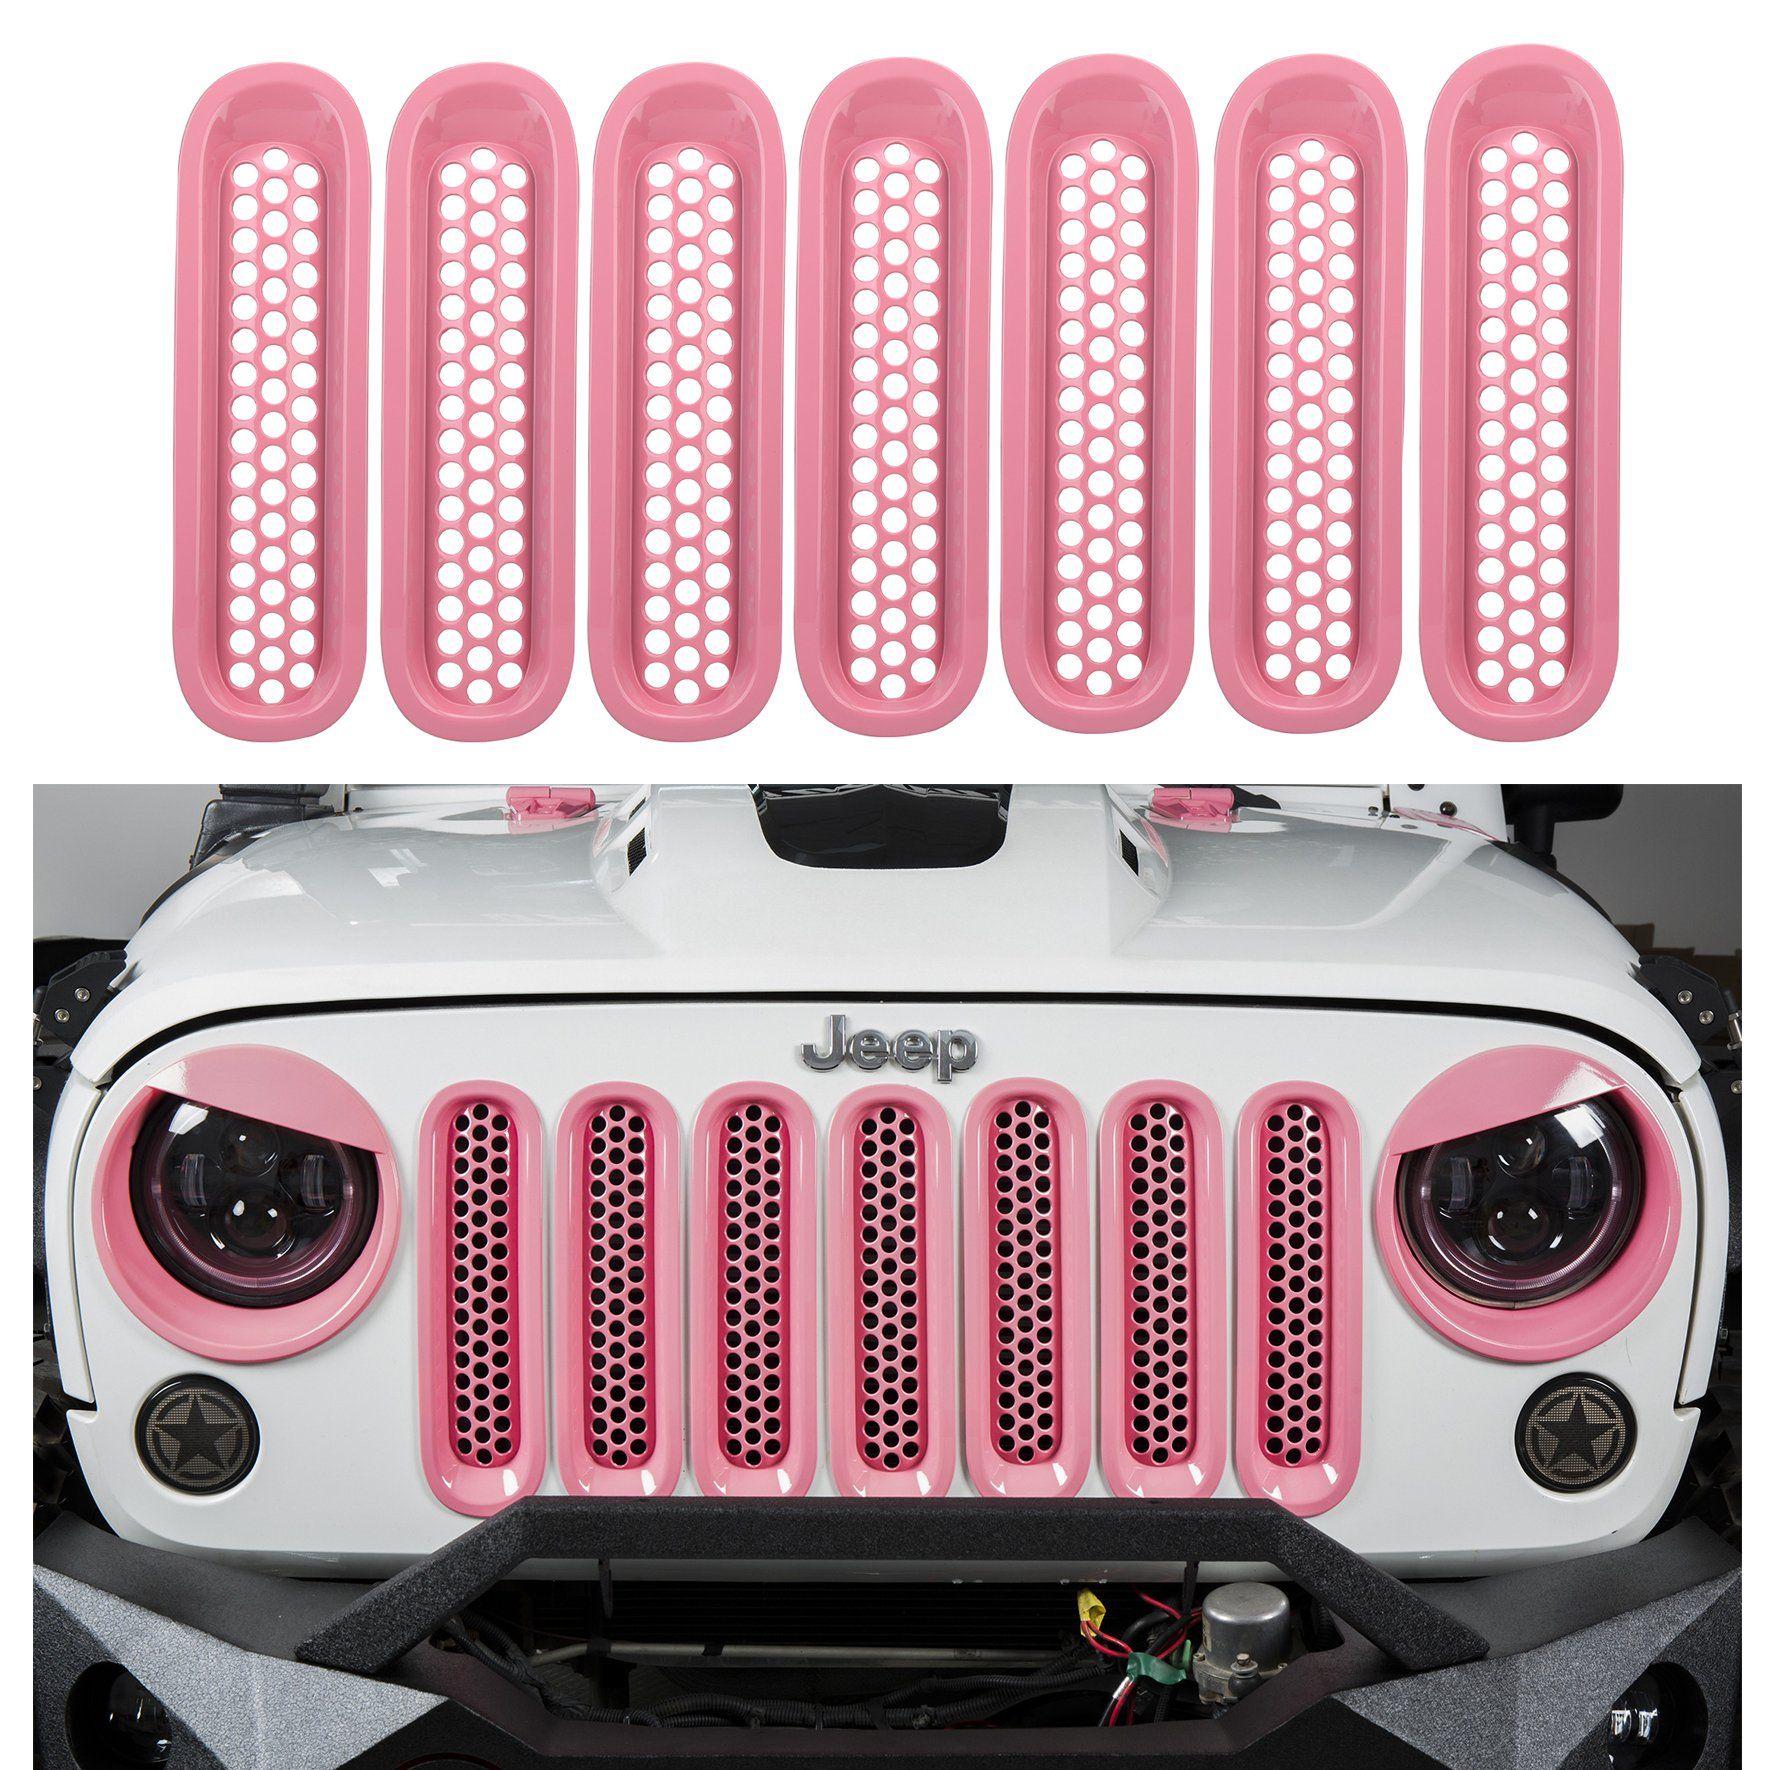 Jeep Grille Hat Logo - Buy Women&;s Pink Jeep Grille Logo Hat in Cheap Price on m